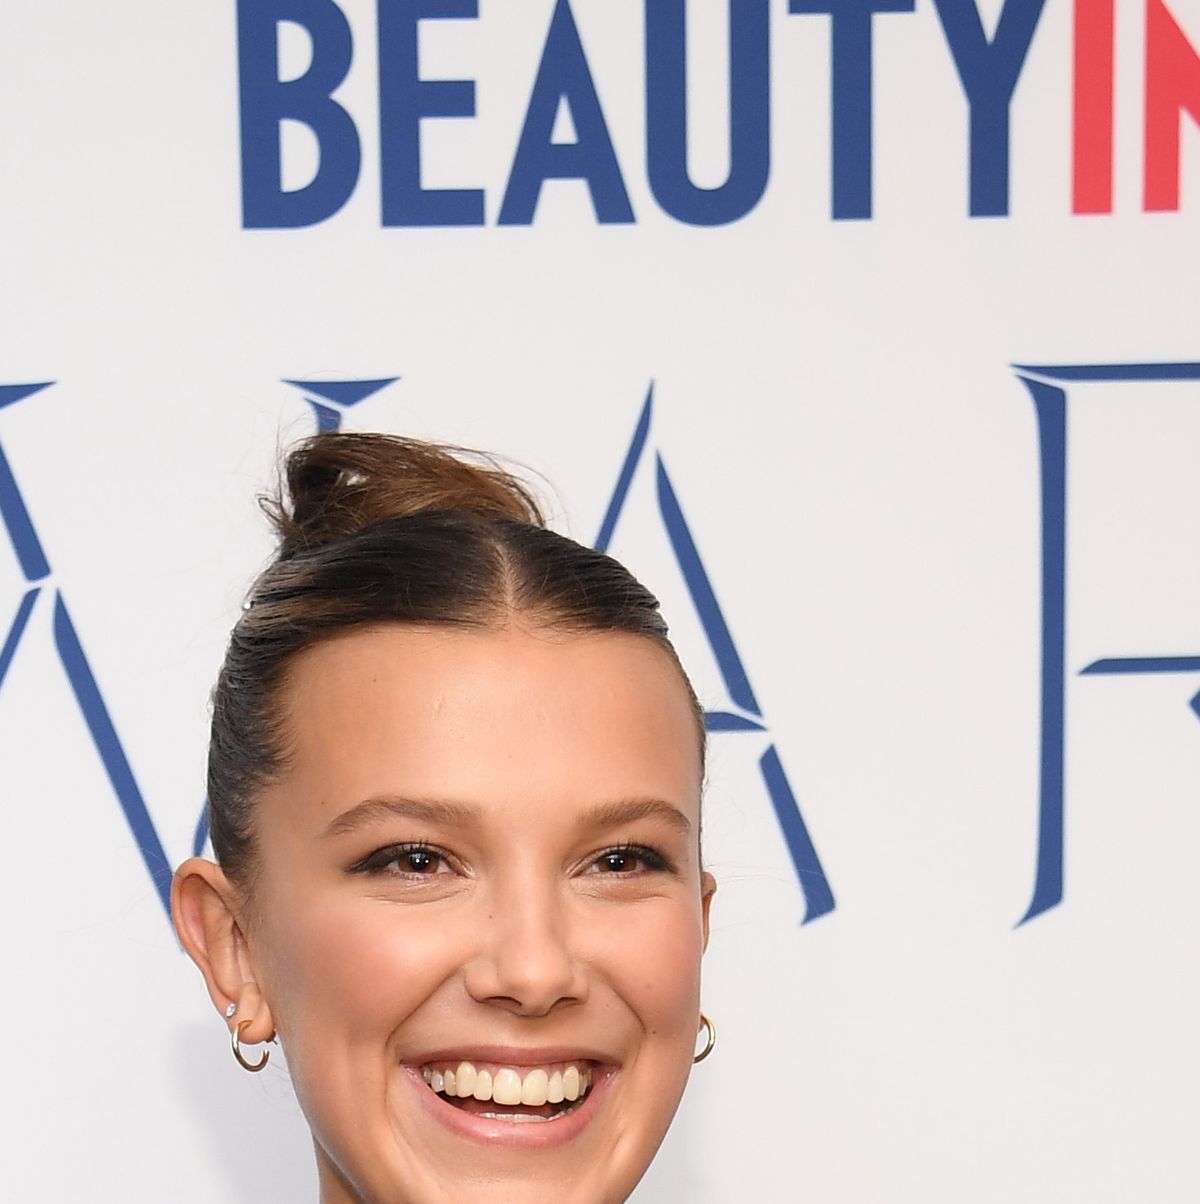 Millie Bobby Brown turns up the heat in stunning crop top in new photos